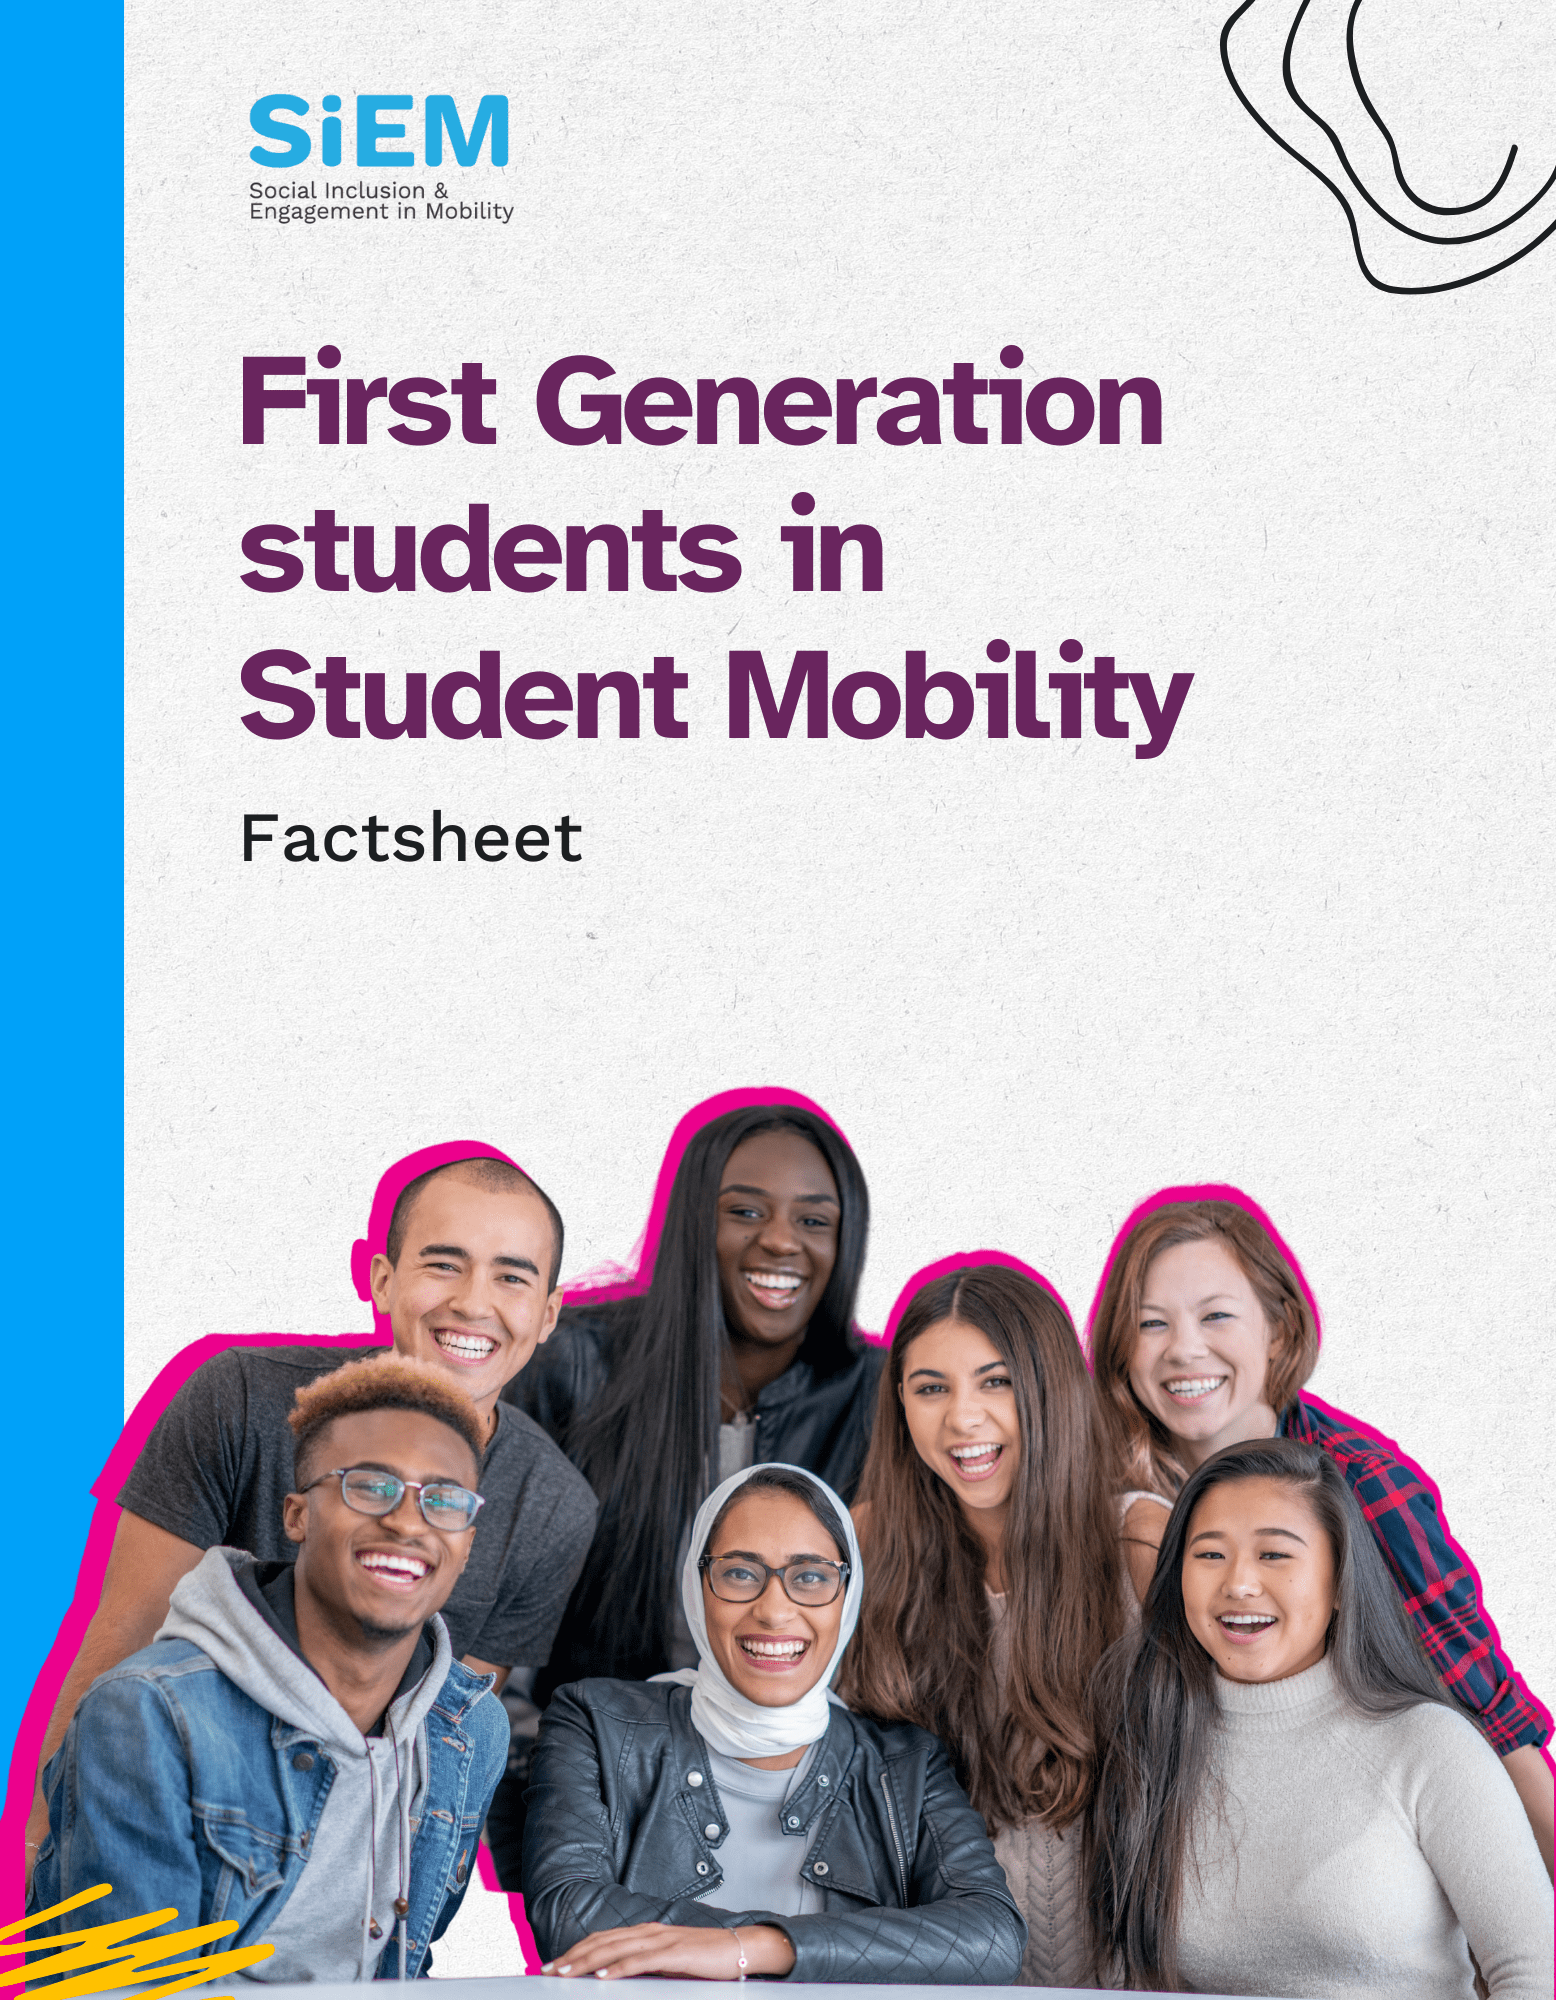 Factsheet - First Generation students in Student Mobility